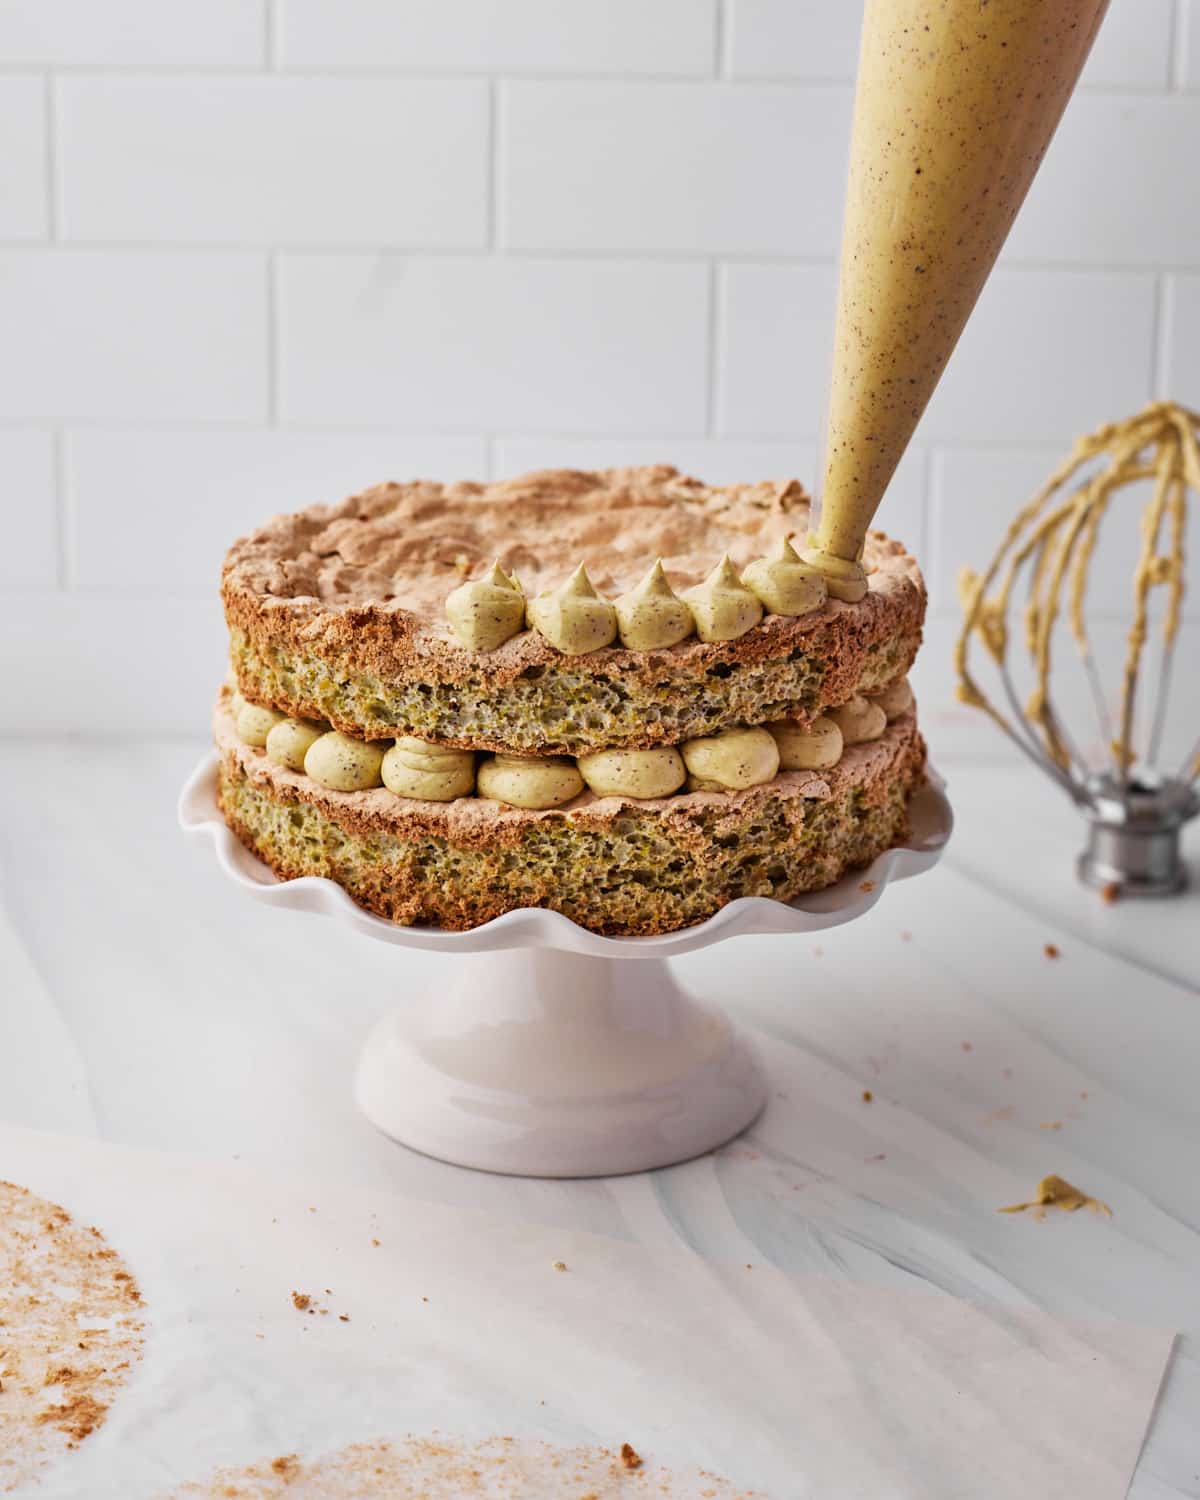 Piping french buttercream onto pistachio dacquoise cake.